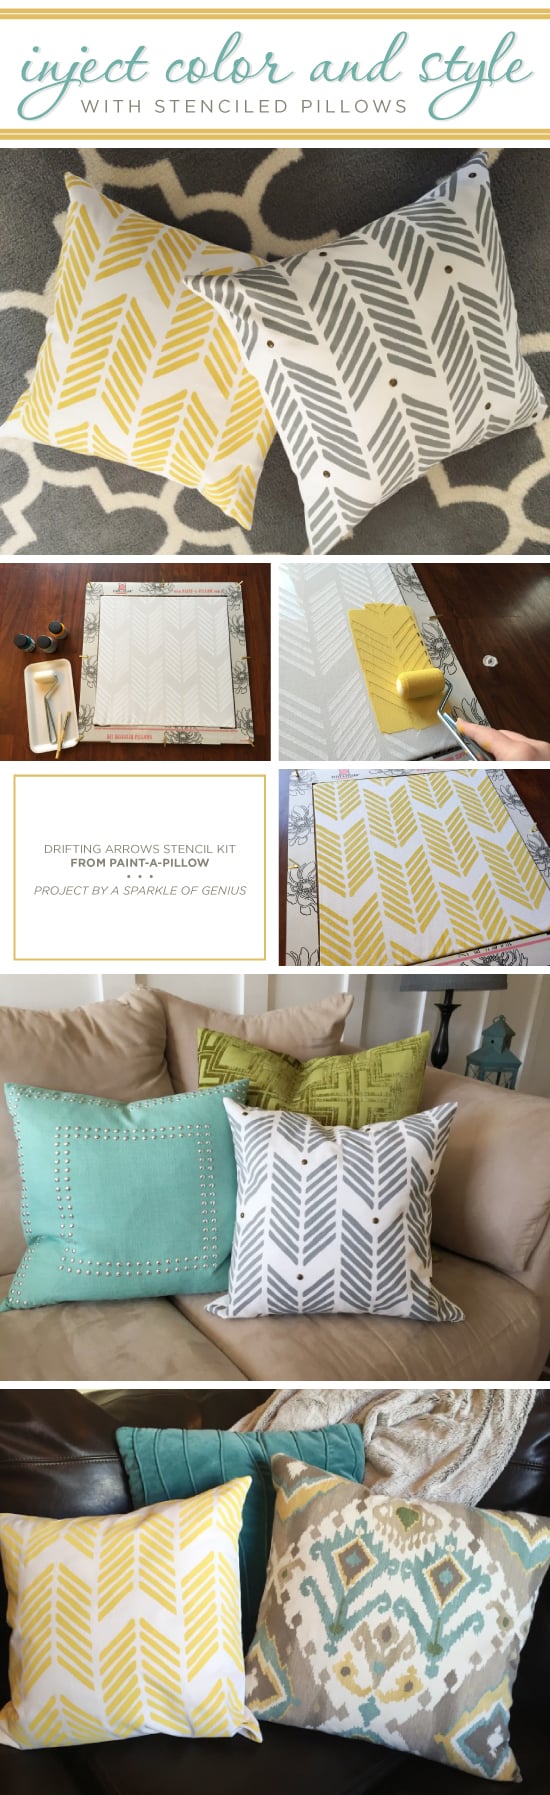 Cutting Edge Stencils shares how to DIY accent pillows using the Drifting Arrows Paint-A-Pillow kit. http://paintapillow.com/index.php/drifting-arrows-paint-a-pillow-kit.html